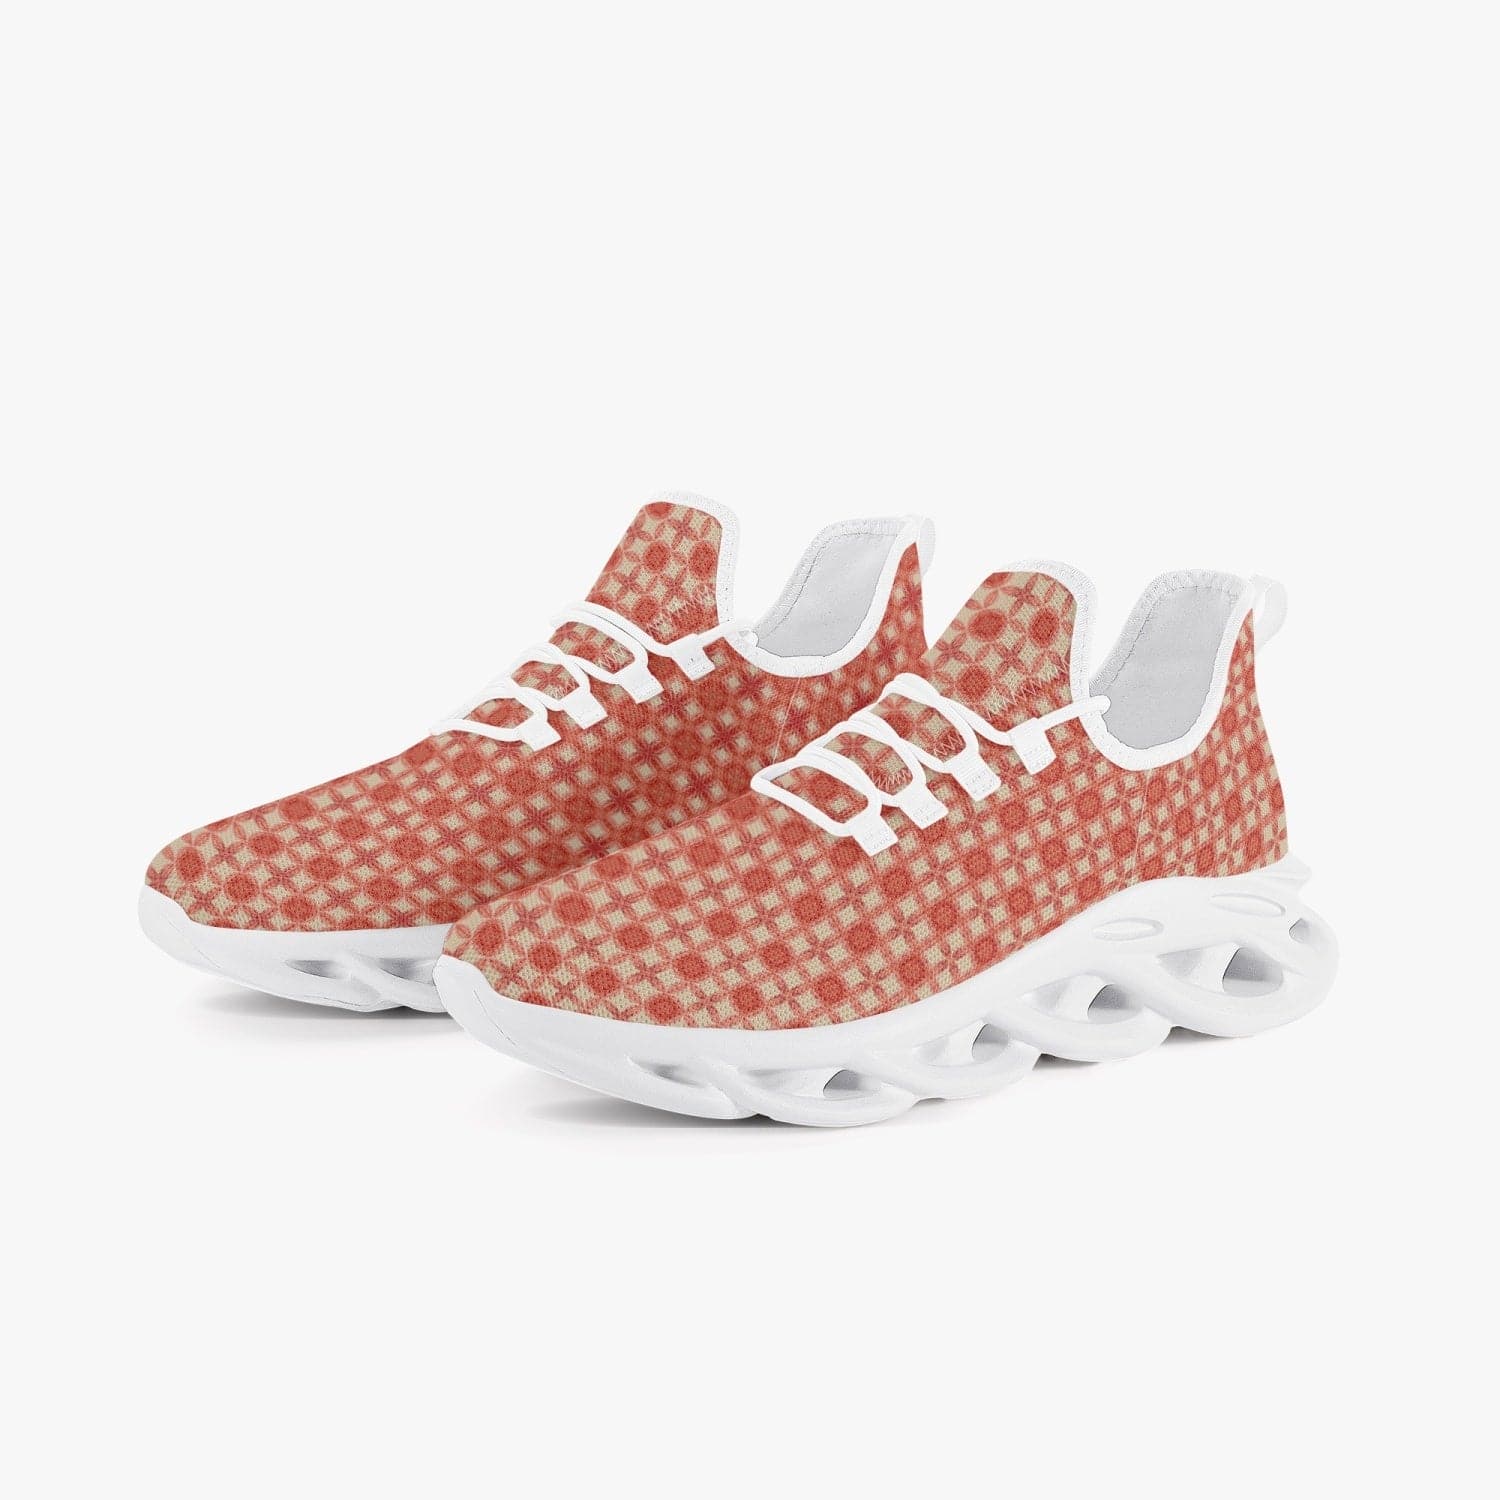 Red Buttercup fine Patterned trendy Bounce Mesh Knit Sneakers - White, by Sensus Studio Design